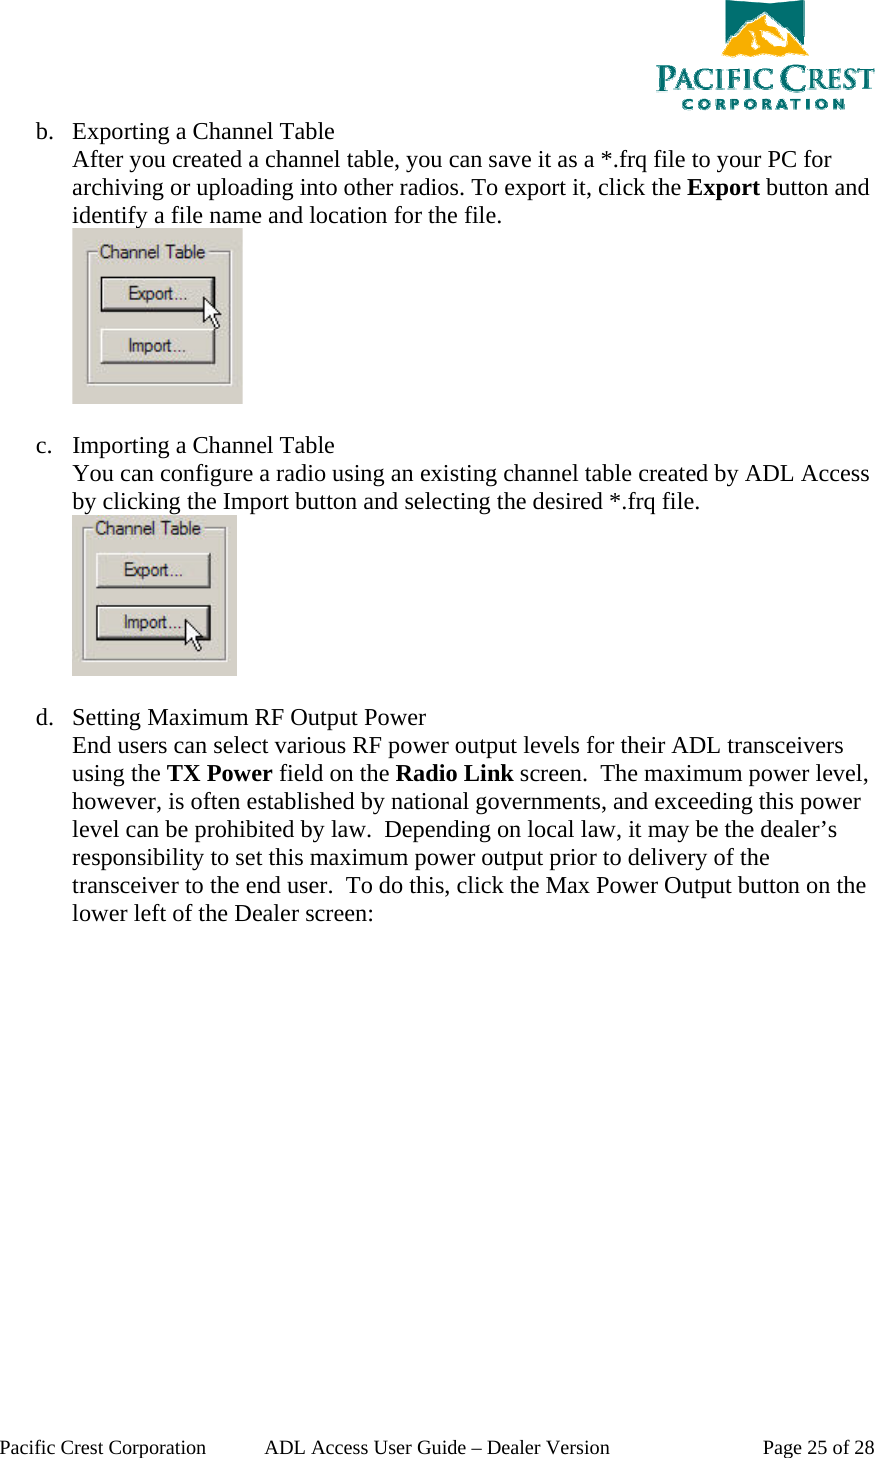  Pacific Crest Corporation  ADL Access User Guide – Dealer Version  Page 25 of 28 b. Exporting a Channel Table After you created a channel table, you can save it as a *.frq file to your PC for archiving or uploading into other radios. To export it, click the Export button and identify a file name and location for the file.   c. Importing a Channel Table You can configure a radio using an existing channel table created by ADL Access by clicking the Import button and selecting the desired *.frq file.   d. Setting Maximum RF Output Power End users can select various RF power output levels for their ADL transceivers using the TX Power field on the Radio Link screen.  The maximum power level, however, is often established by national governments, and exceeding this power level can be prohibited by law.  Depending on local law, it may be the dealer’s responsibility to set this maximum power output prior to delivery of the transceiver to the end user.  To do this, click the Max Power Output button on the lower left of the Dealer screen: 